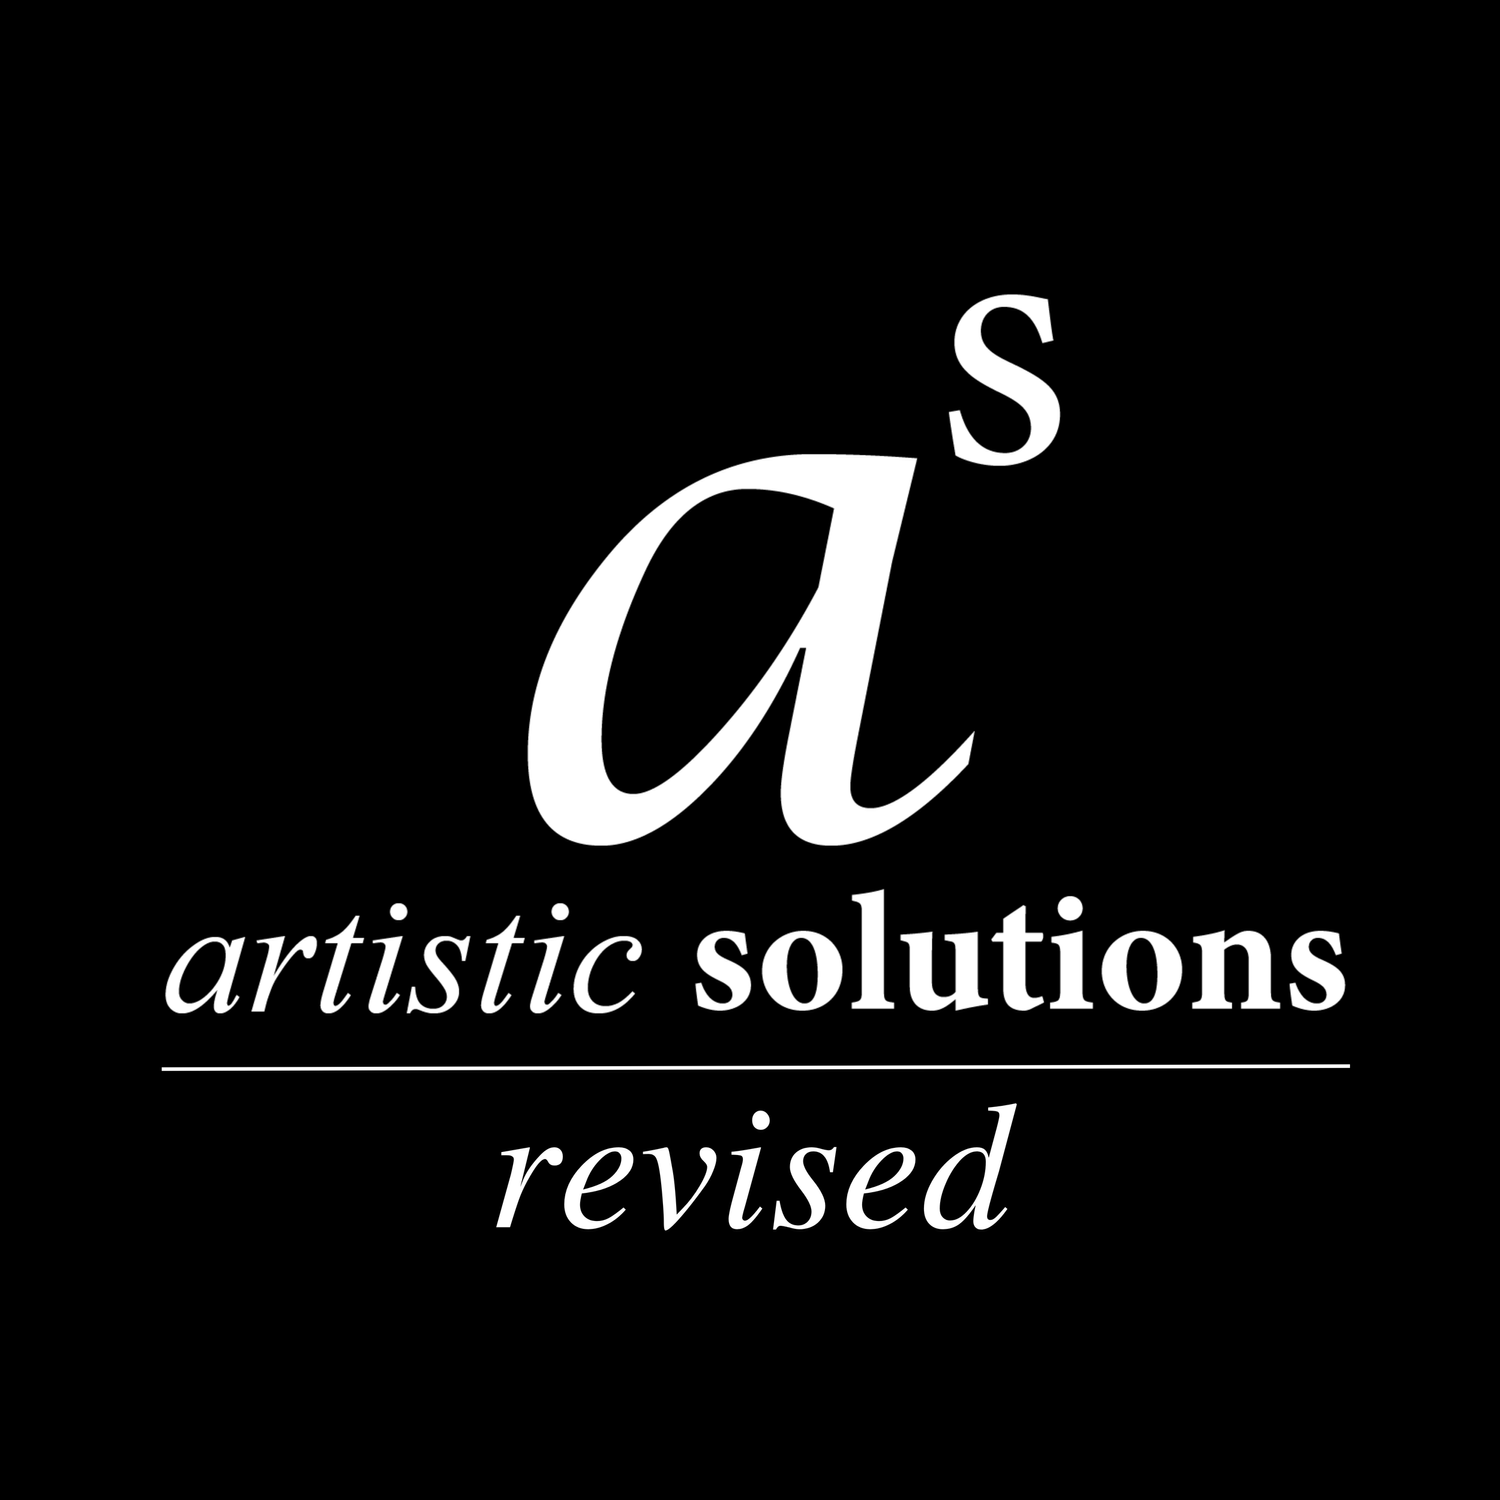 Artistic Solutions Revised